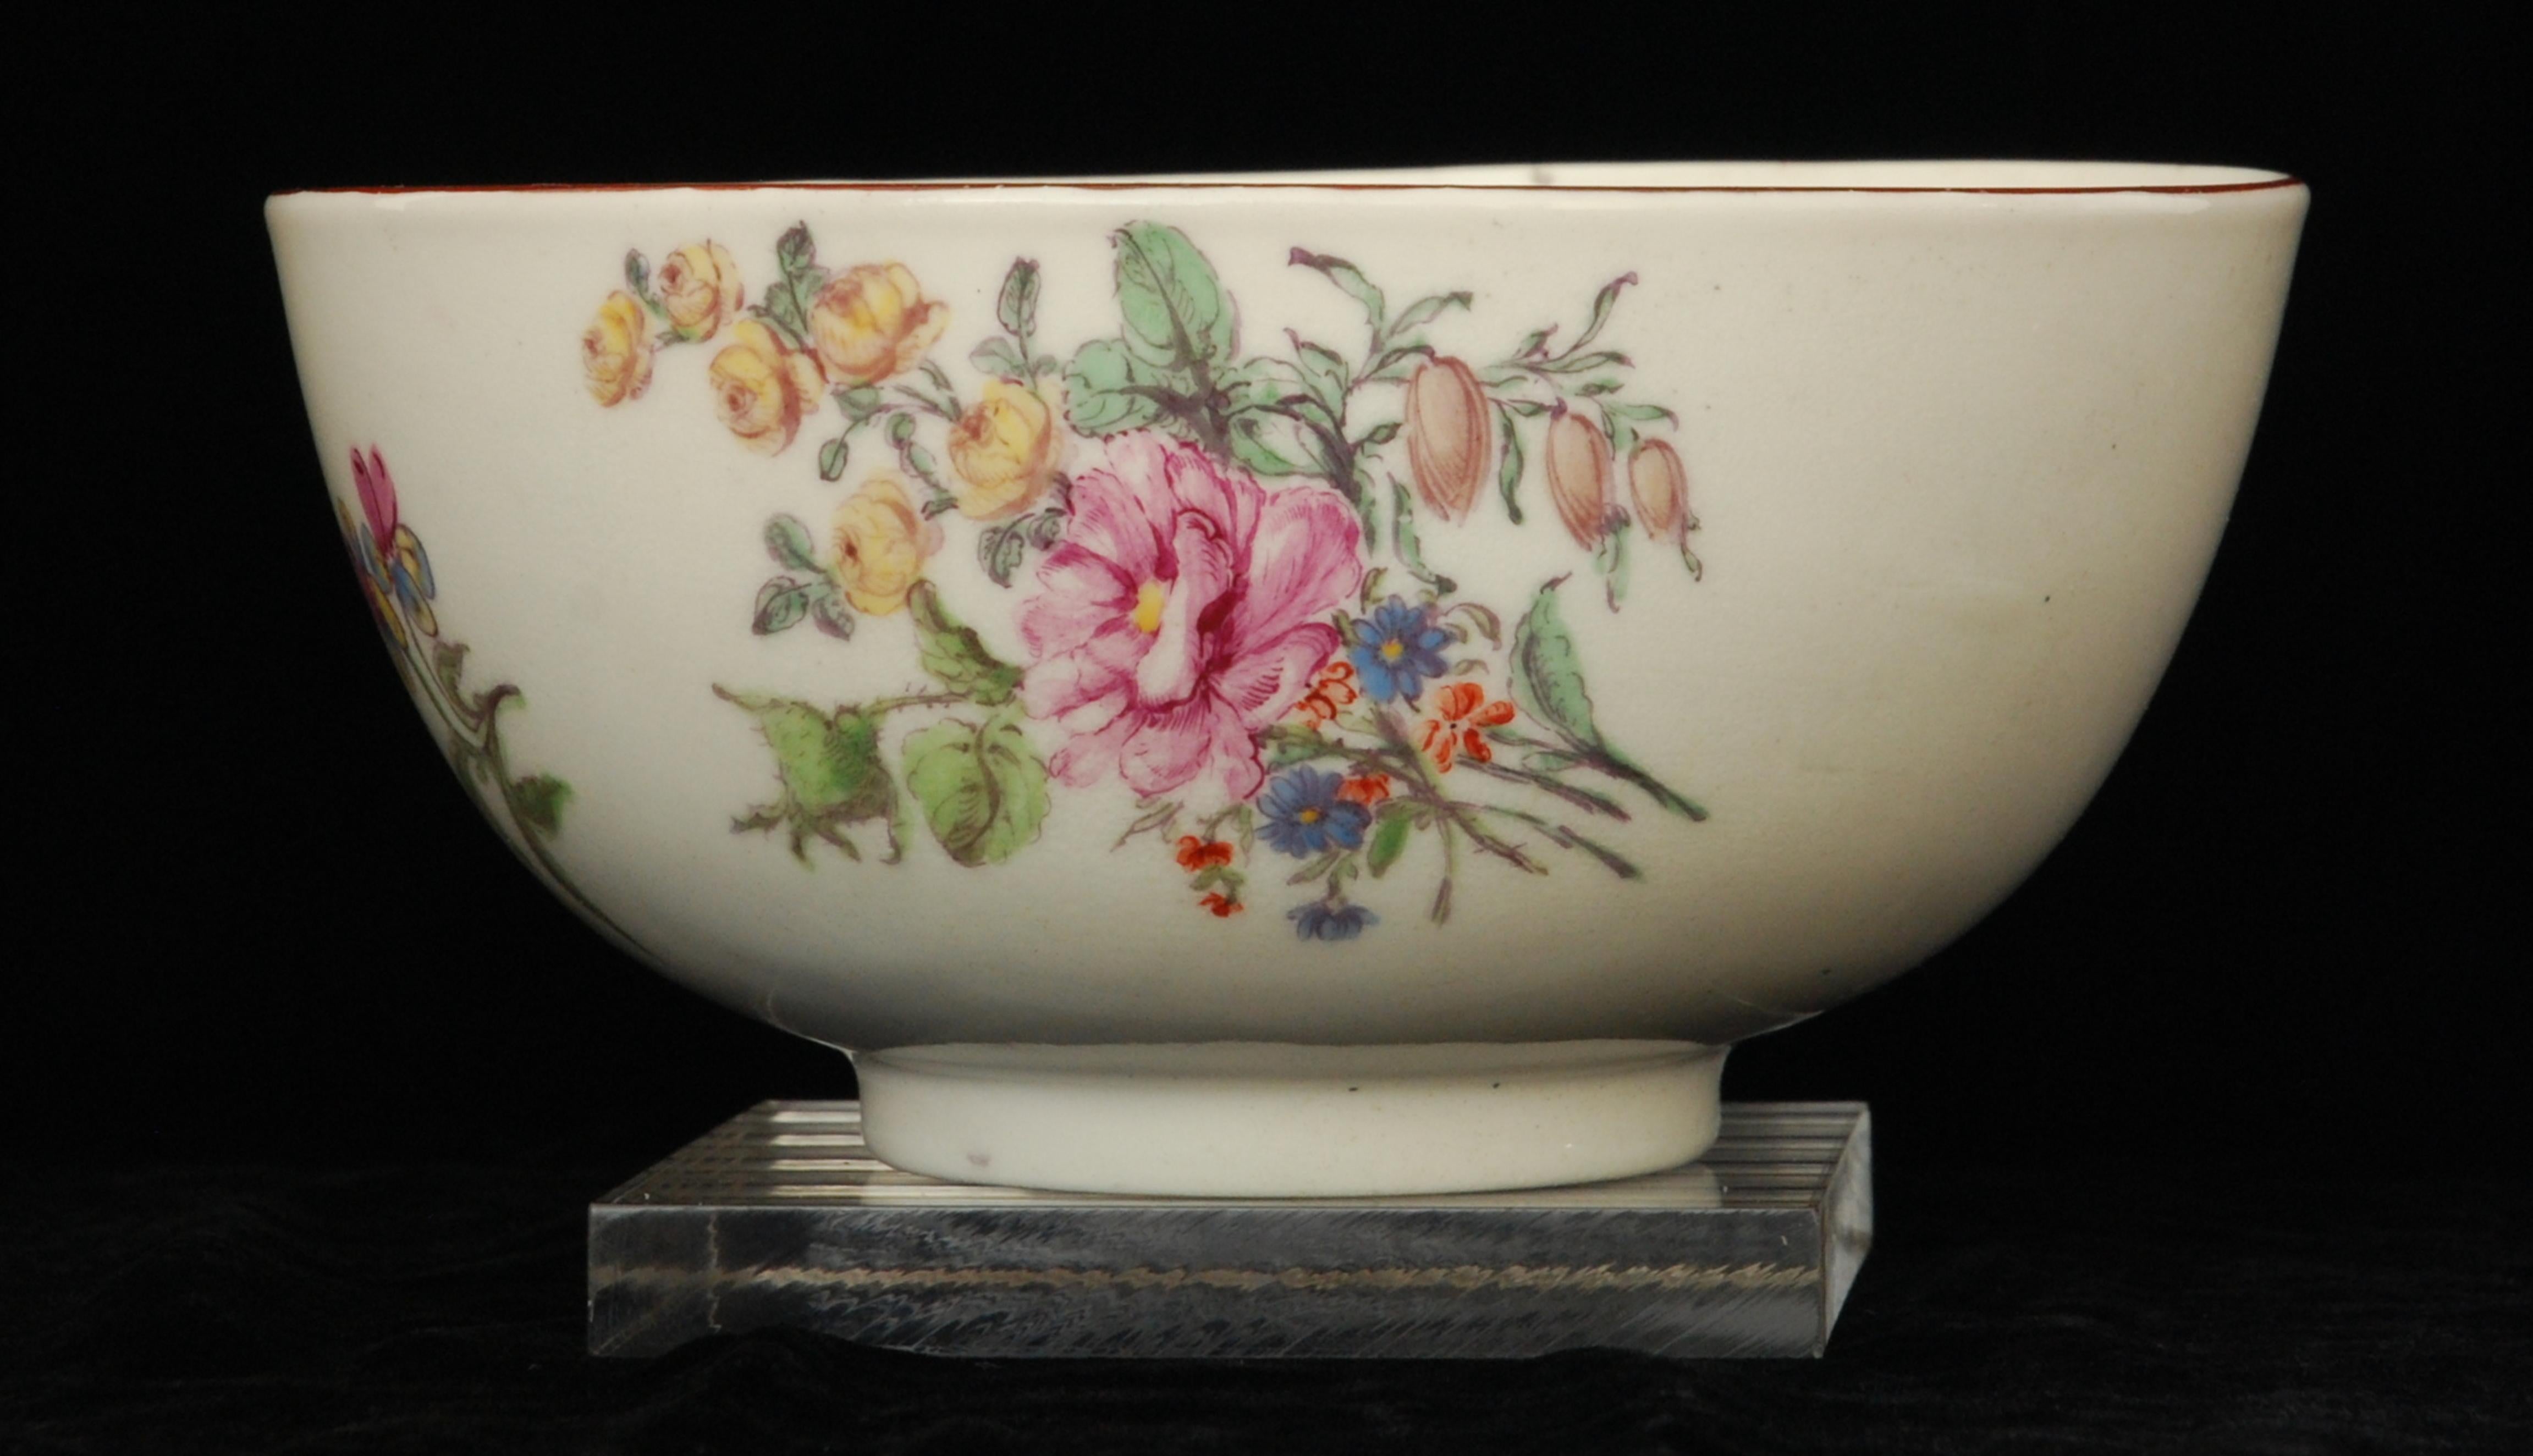 An unusual waste bowl (sometimes called a slop bowl) in soft-paste porcelain, decorated with typical Chelsea sprigs and bunches of flowers.

One of the most distinctive features of Chelsea porcelain is its intricate floral painting, which often